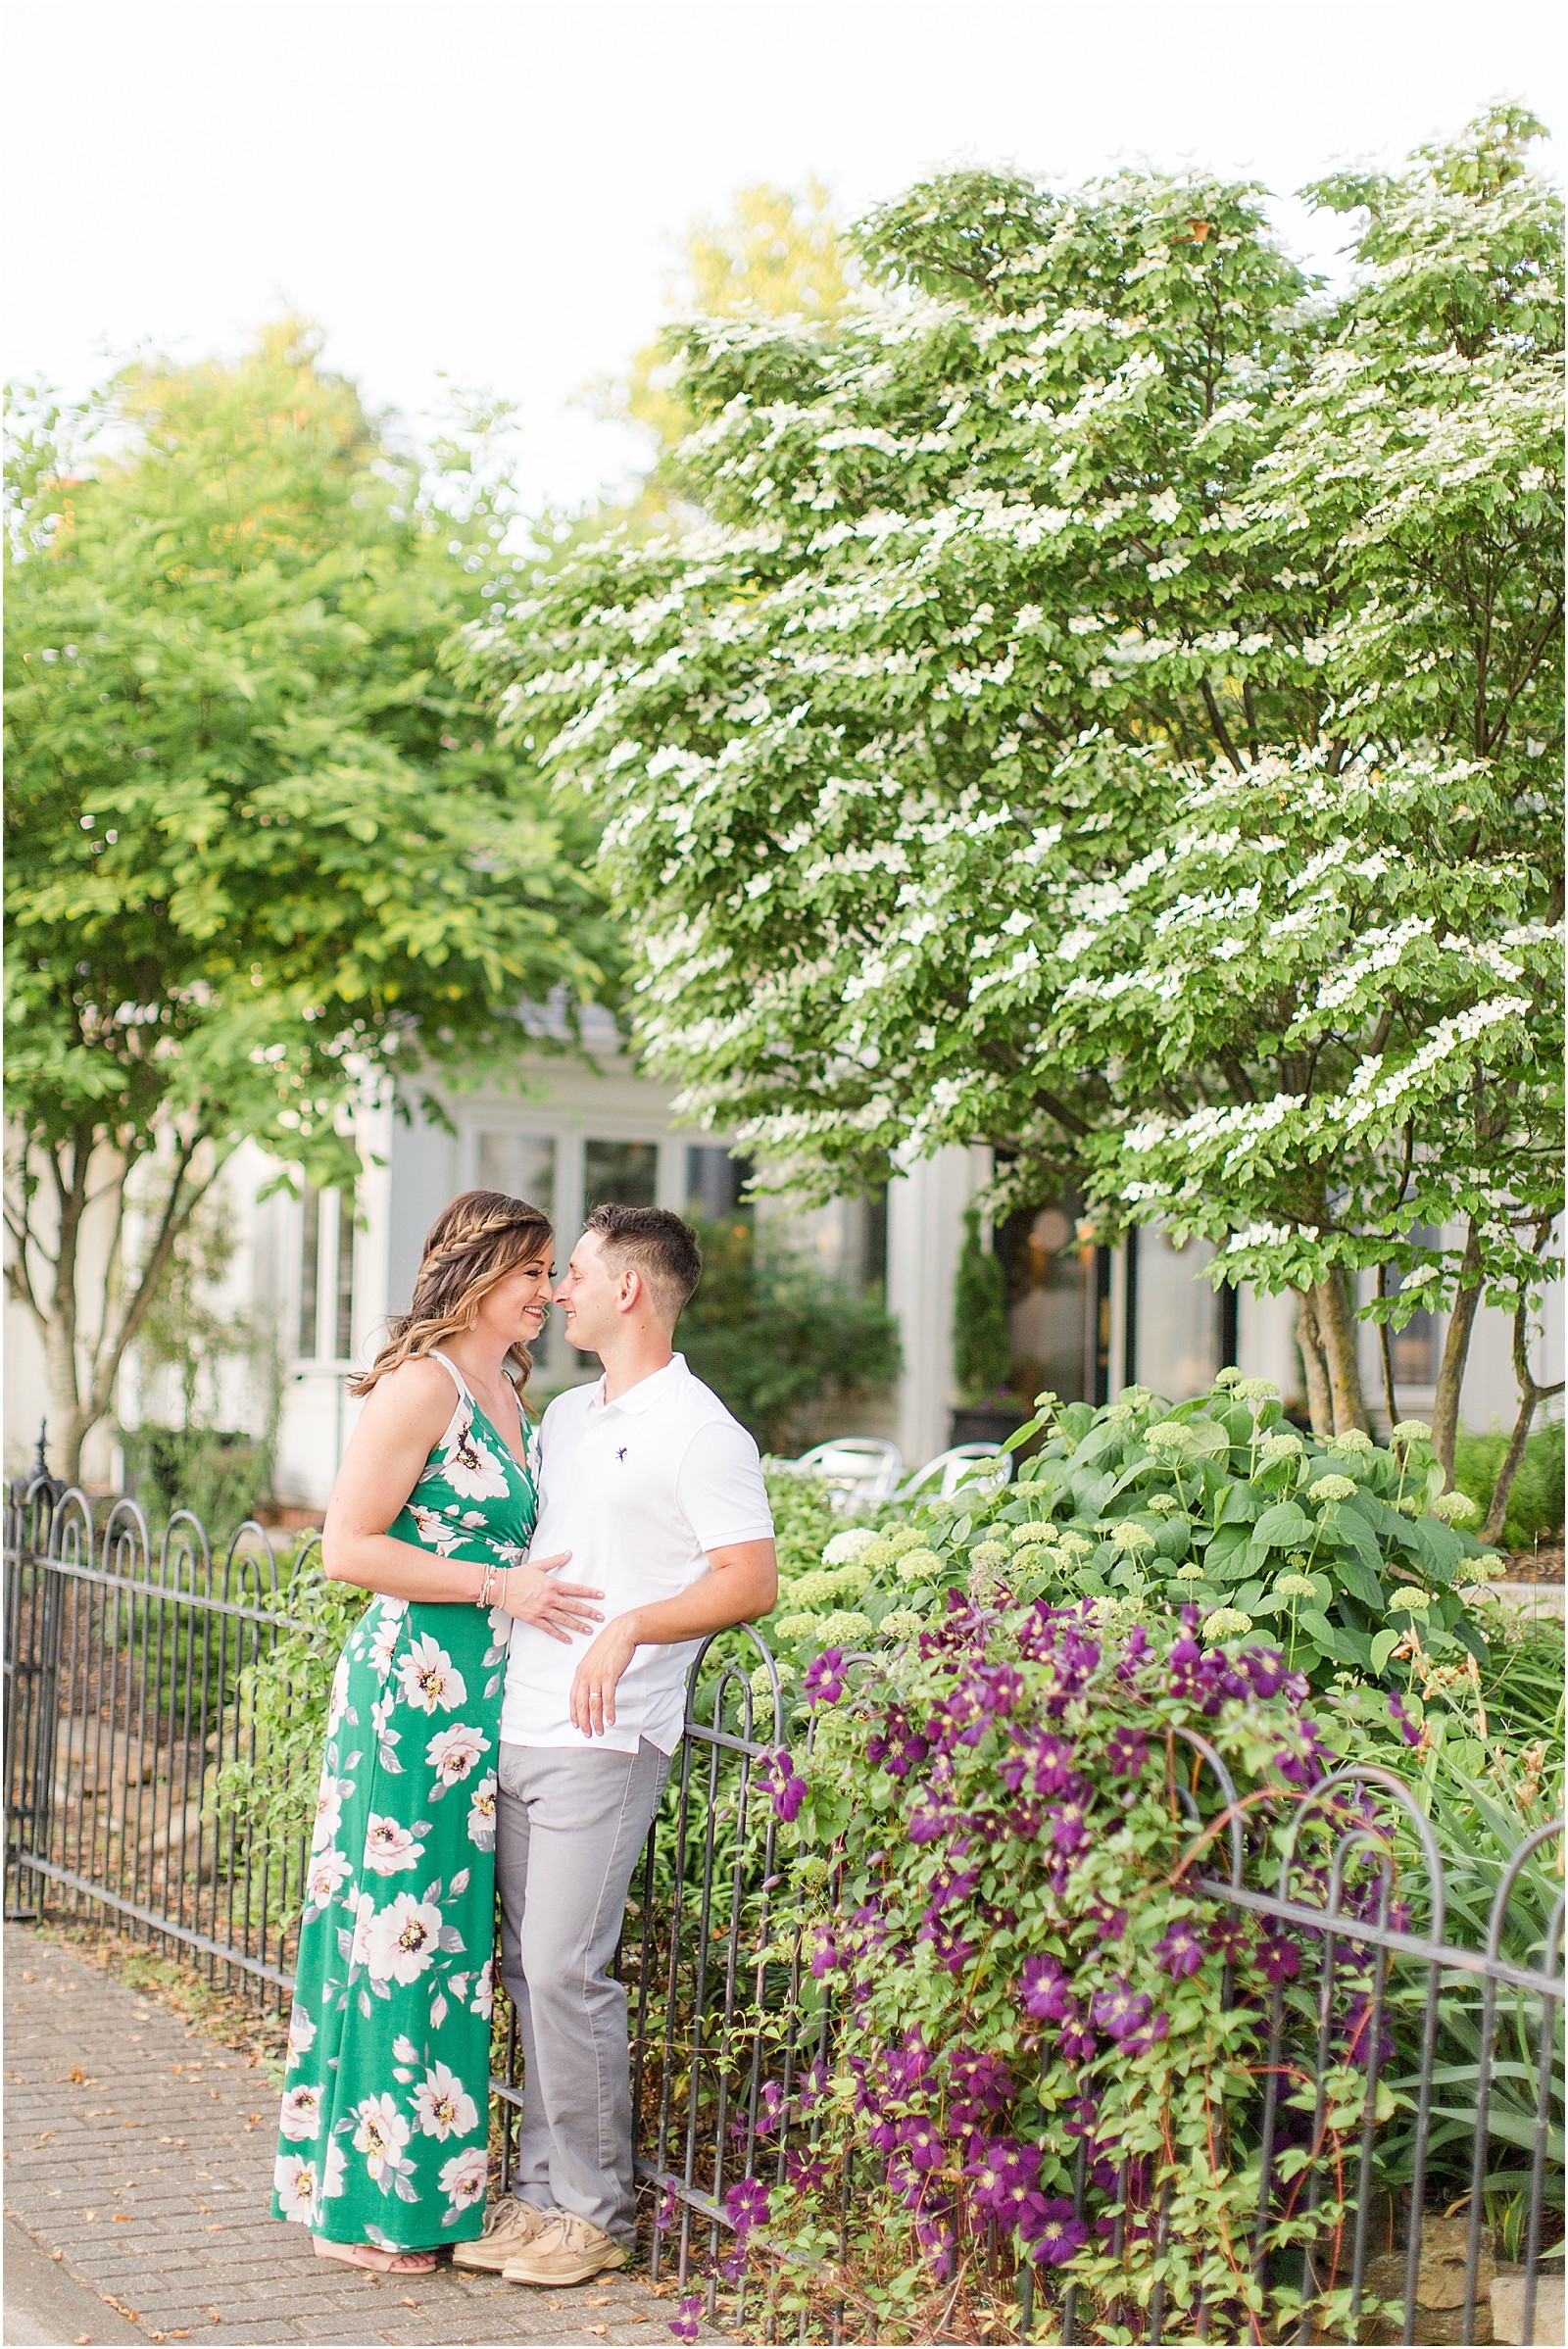 20 West Downtown Newburgh Anniversary Session | Katie and Bobby | Bret and Brandie Photography 016.jpg